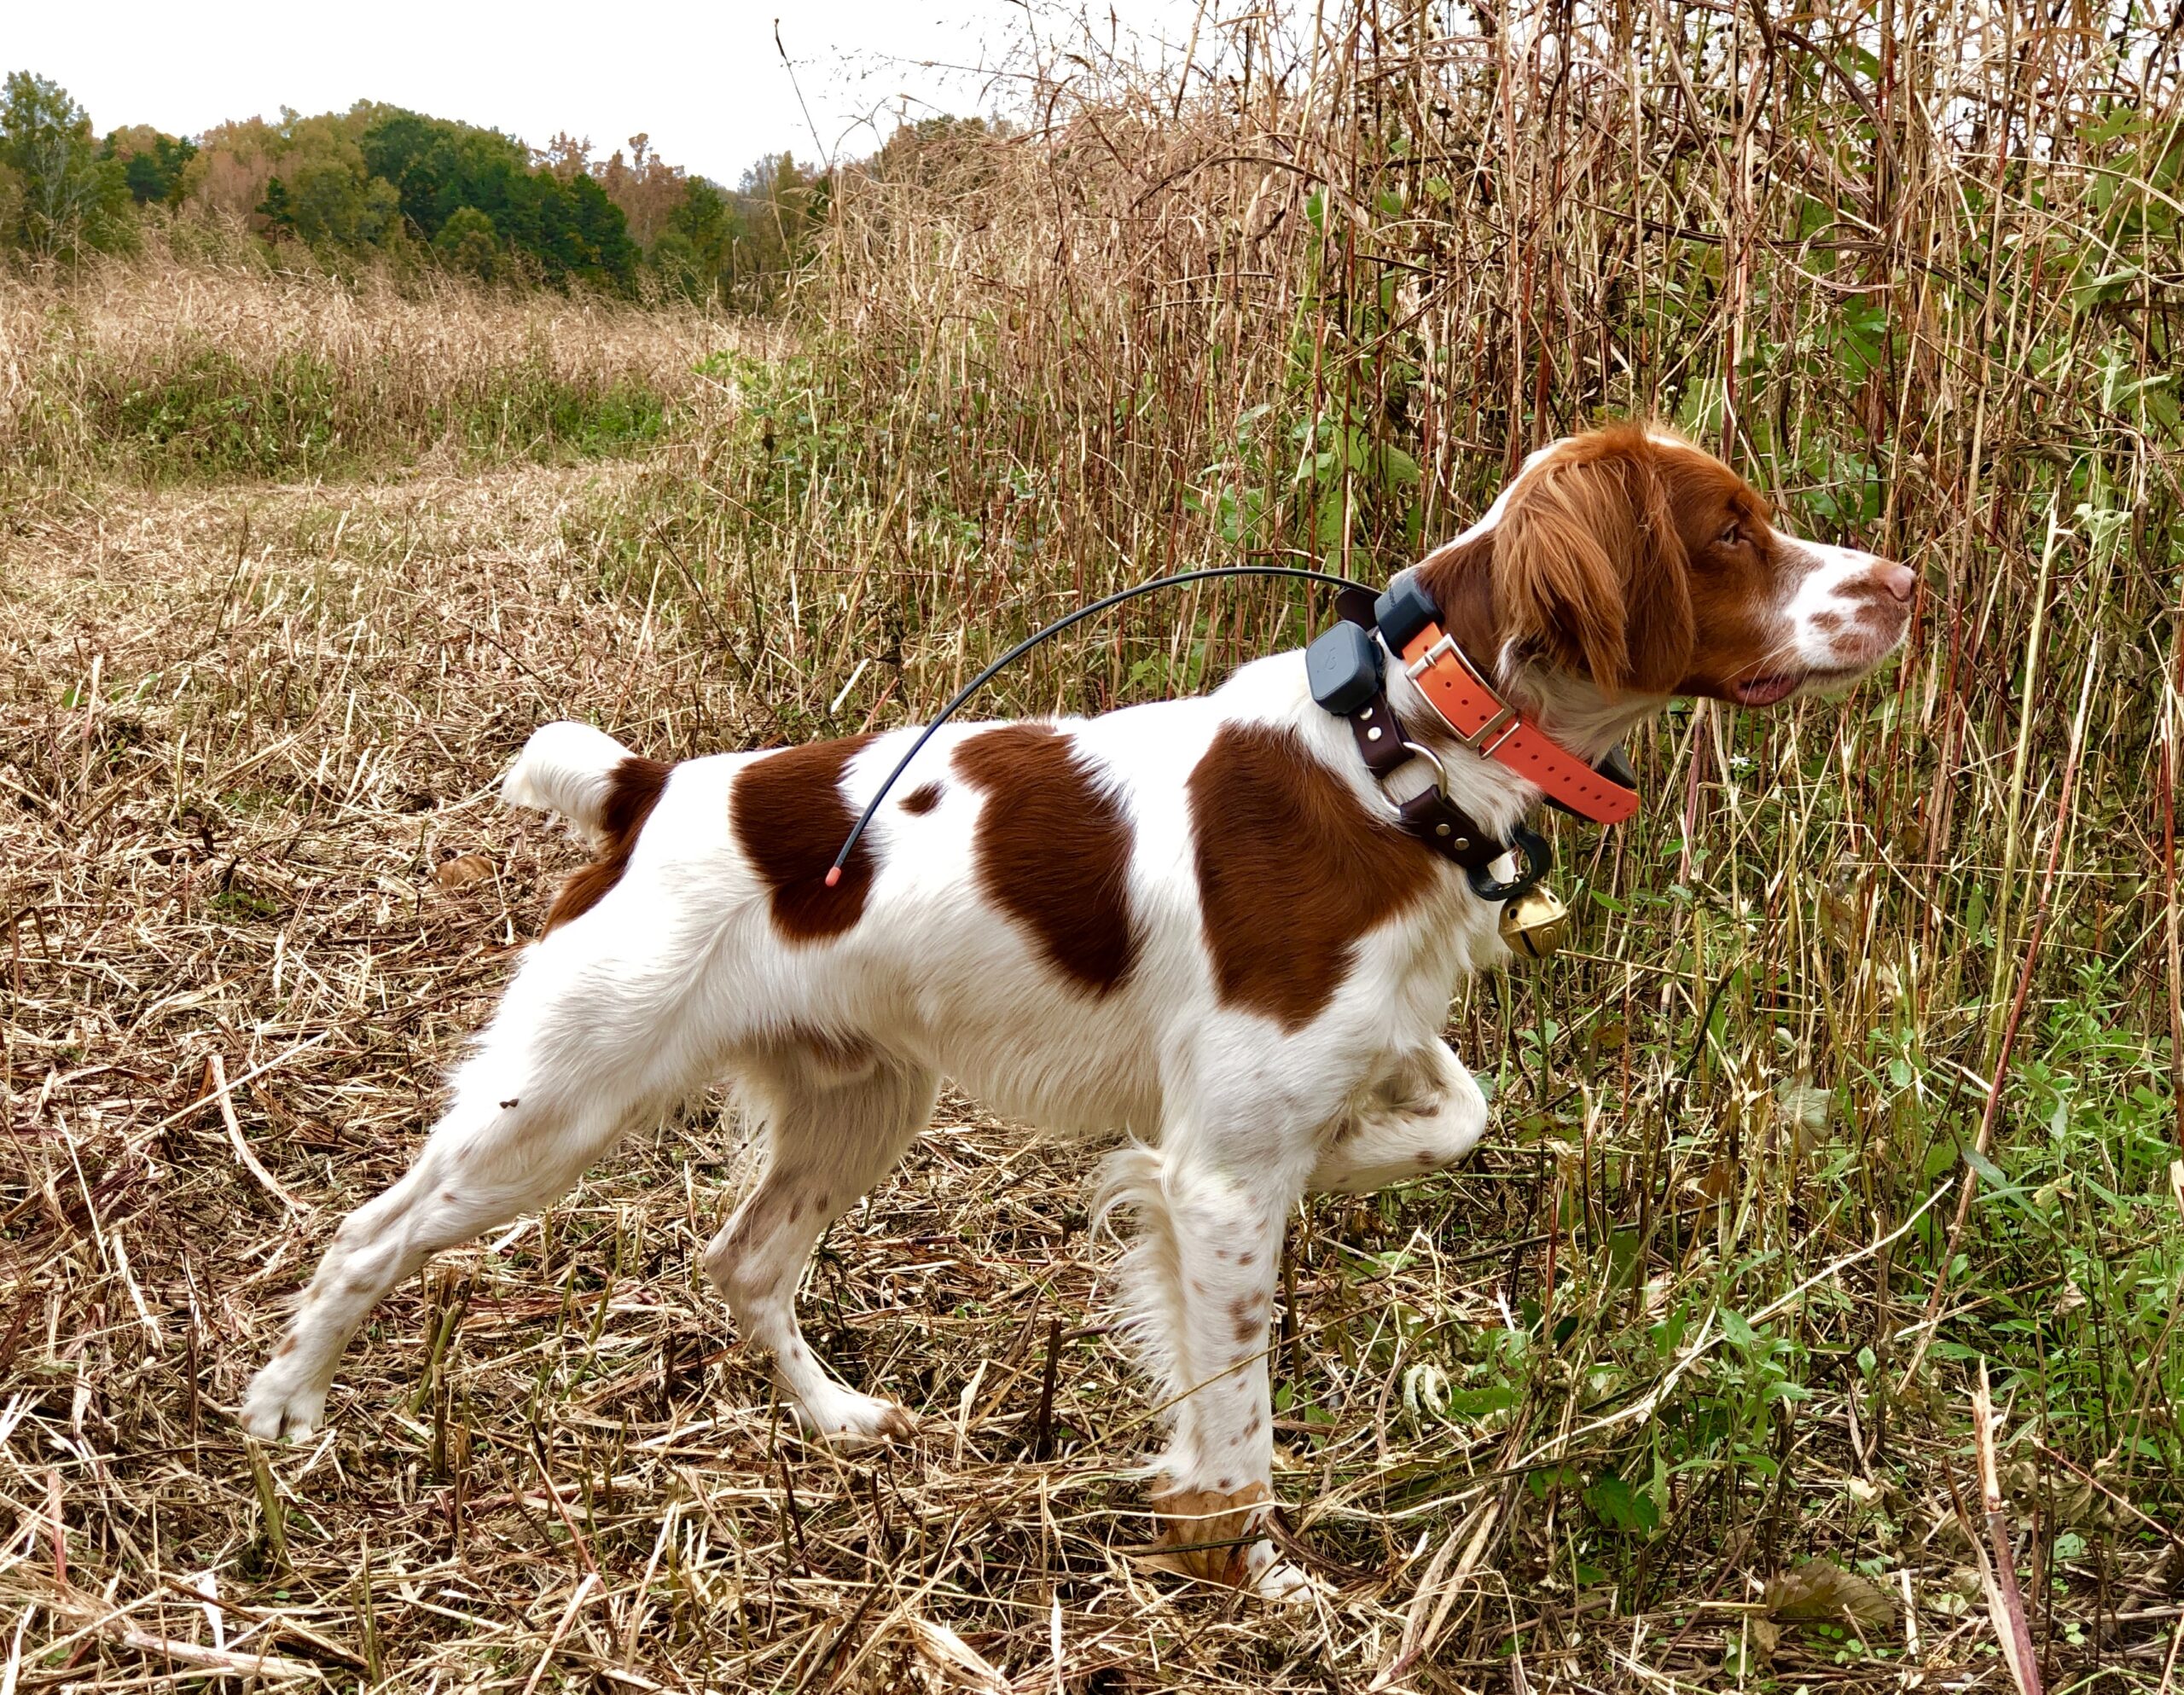 Tractive dog GPS collar review: Great budget tracking collar